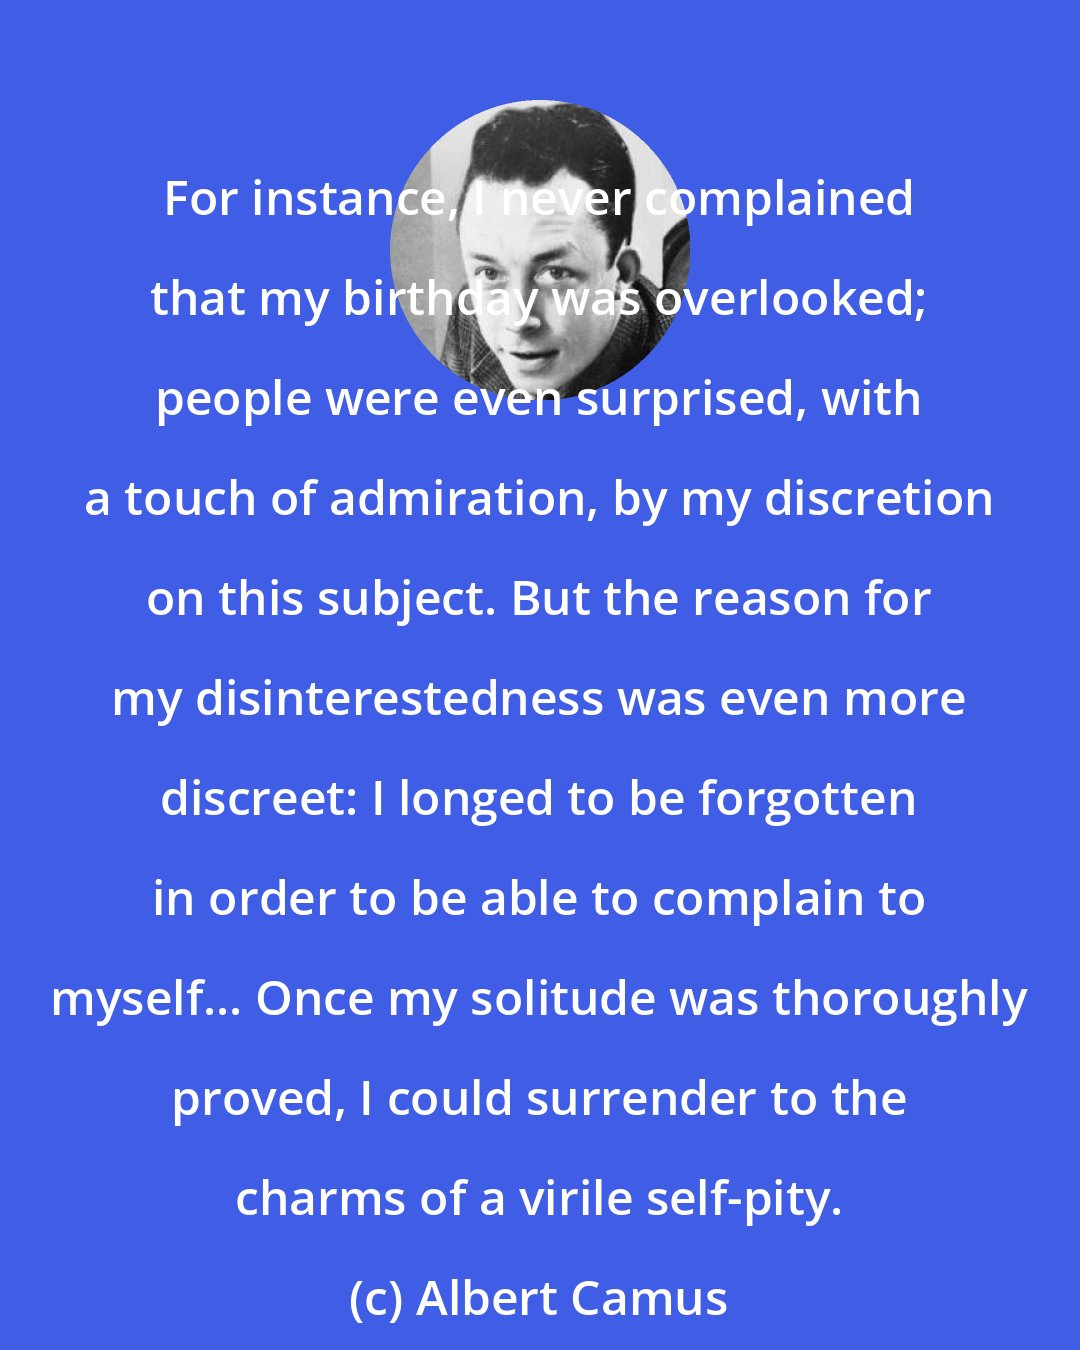 Albert Camus: For instance, I never complained that my birthday was overlooked; people were even surprised, with a touch of admiration, by my discretion on this subject. But the reason for my disinterestedness was even more discreet: I longed to be forgotten in order to be able to complain to myself... Once my solitude was thoroughly proved, I could surrender to the charms of a virile self-pity.